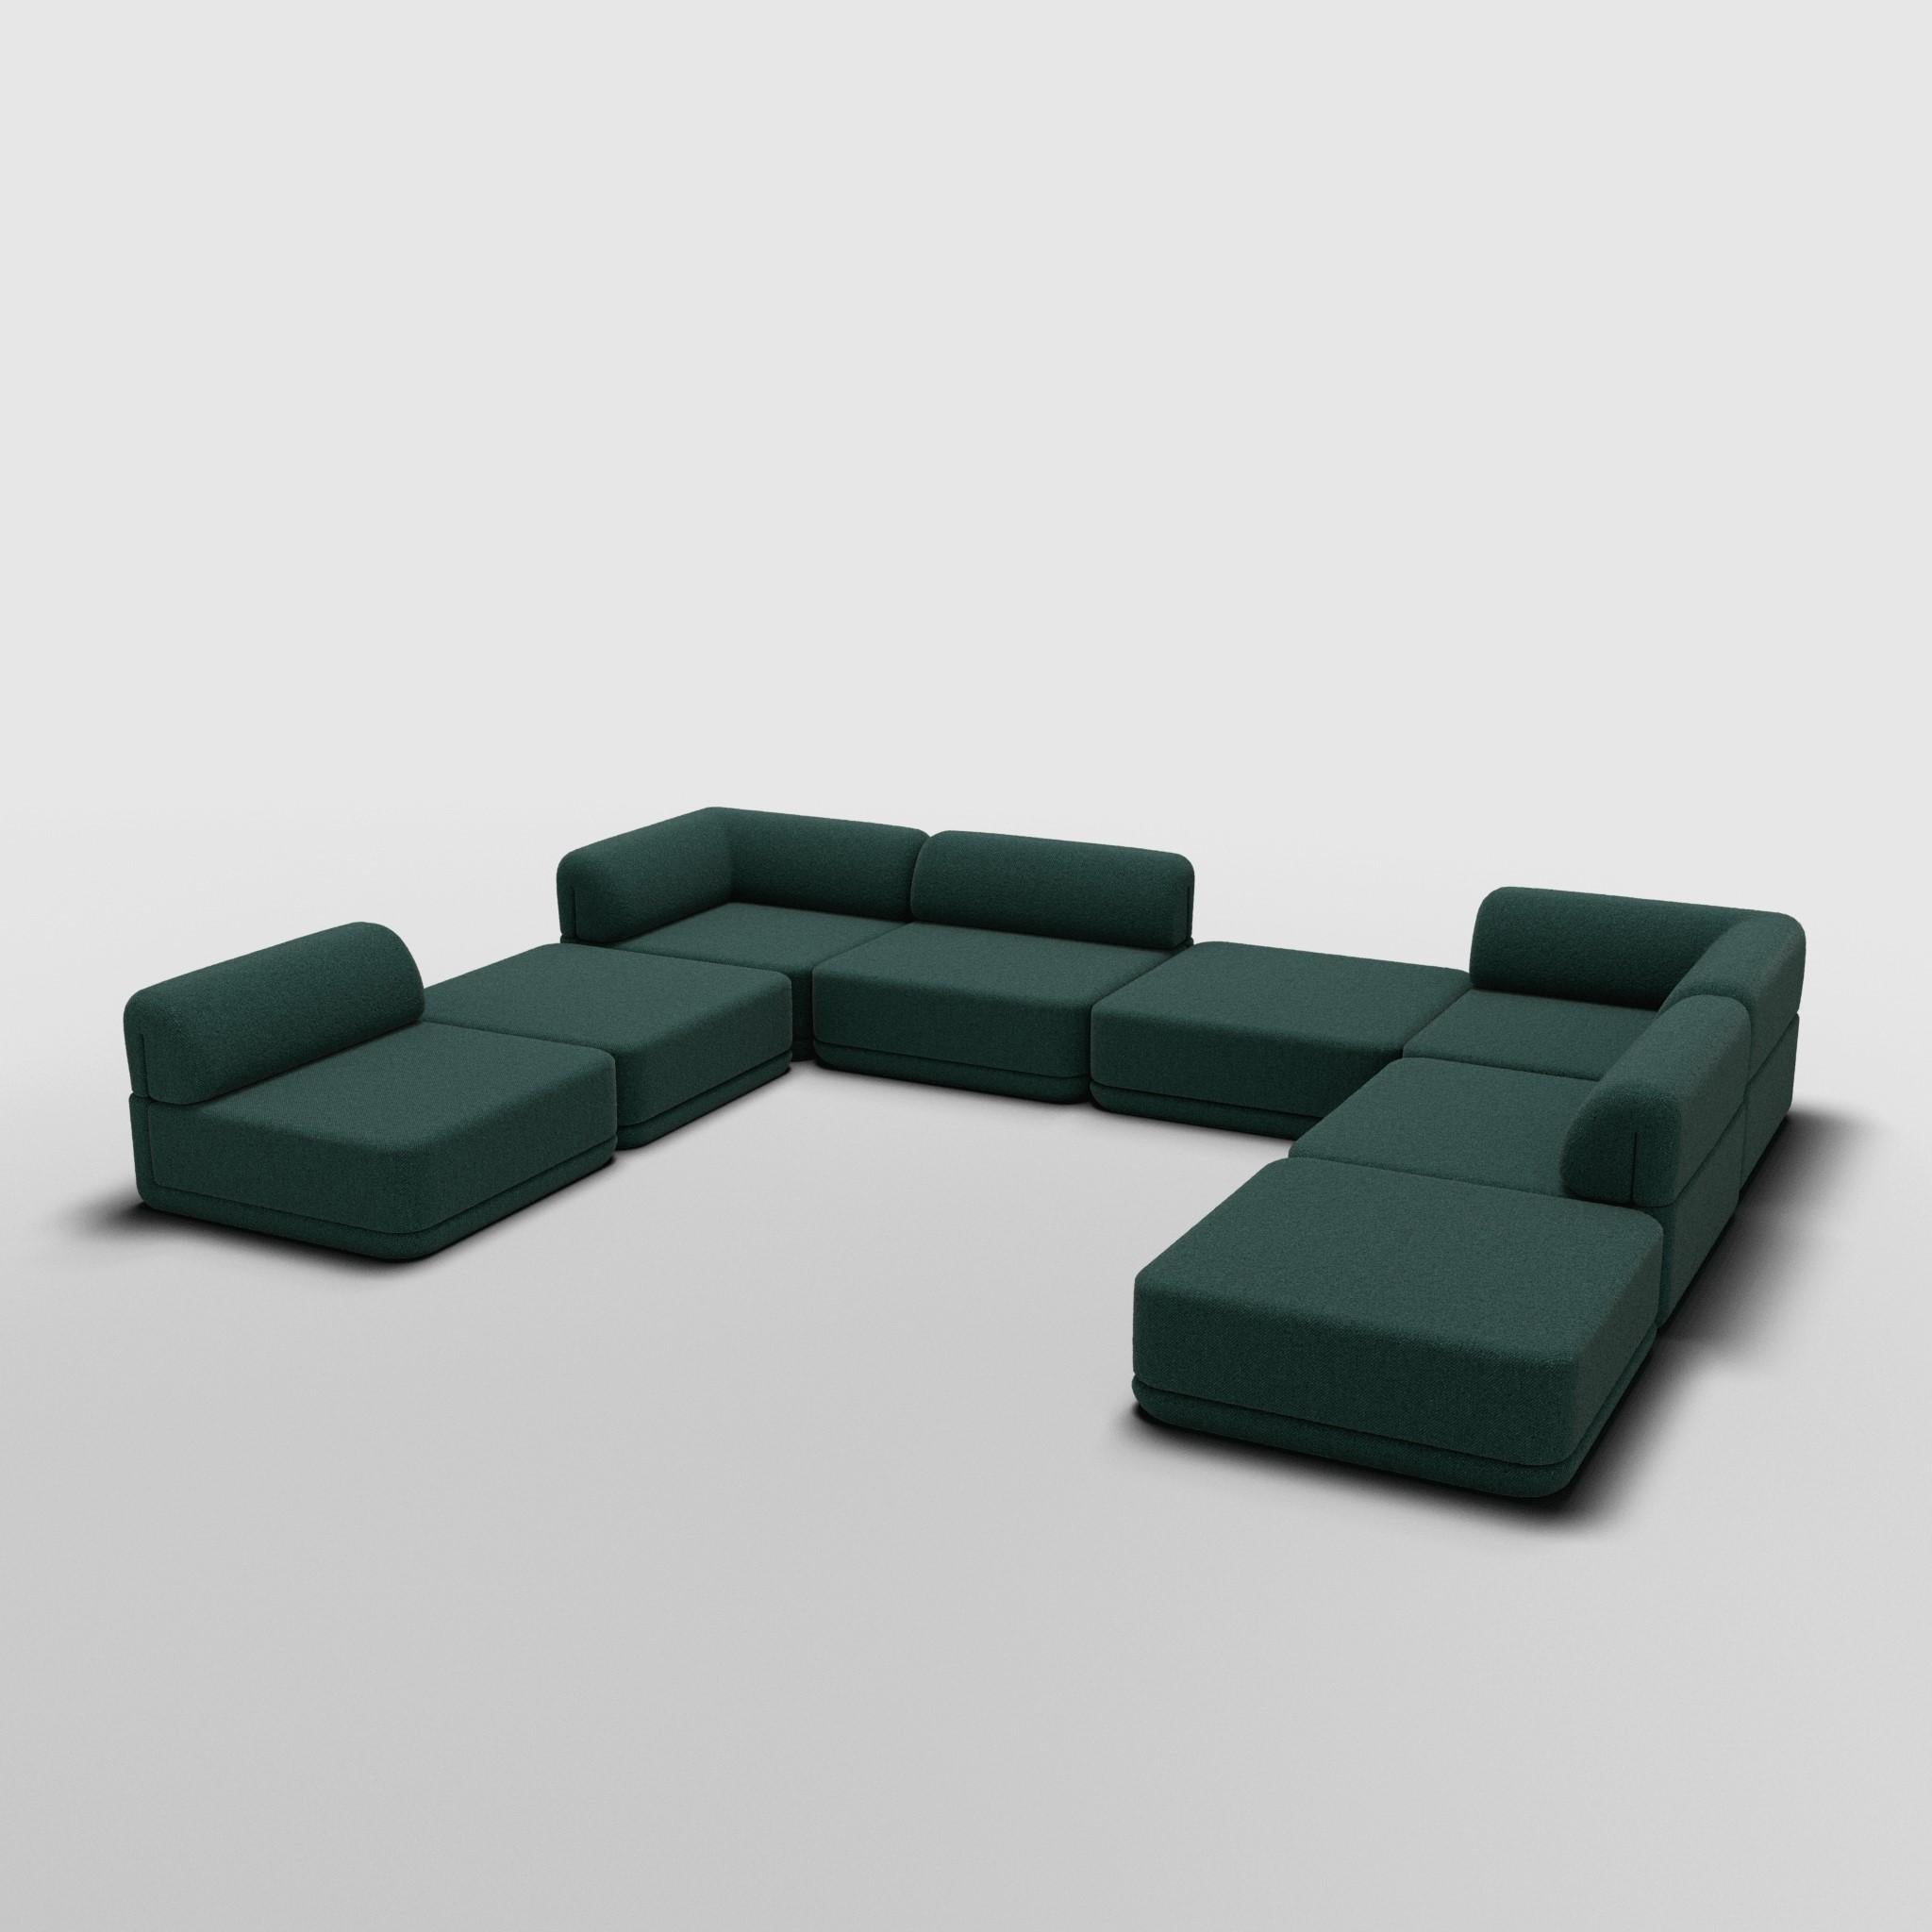 Corner Full Mix Sectional - Inspired by 70s Italian Luxury Furniture

Discover The Cube Sofa, where art meets adaptability. Its sculptural design and customizable comfort create endless possibilities for your living space. Make a statement, elevate